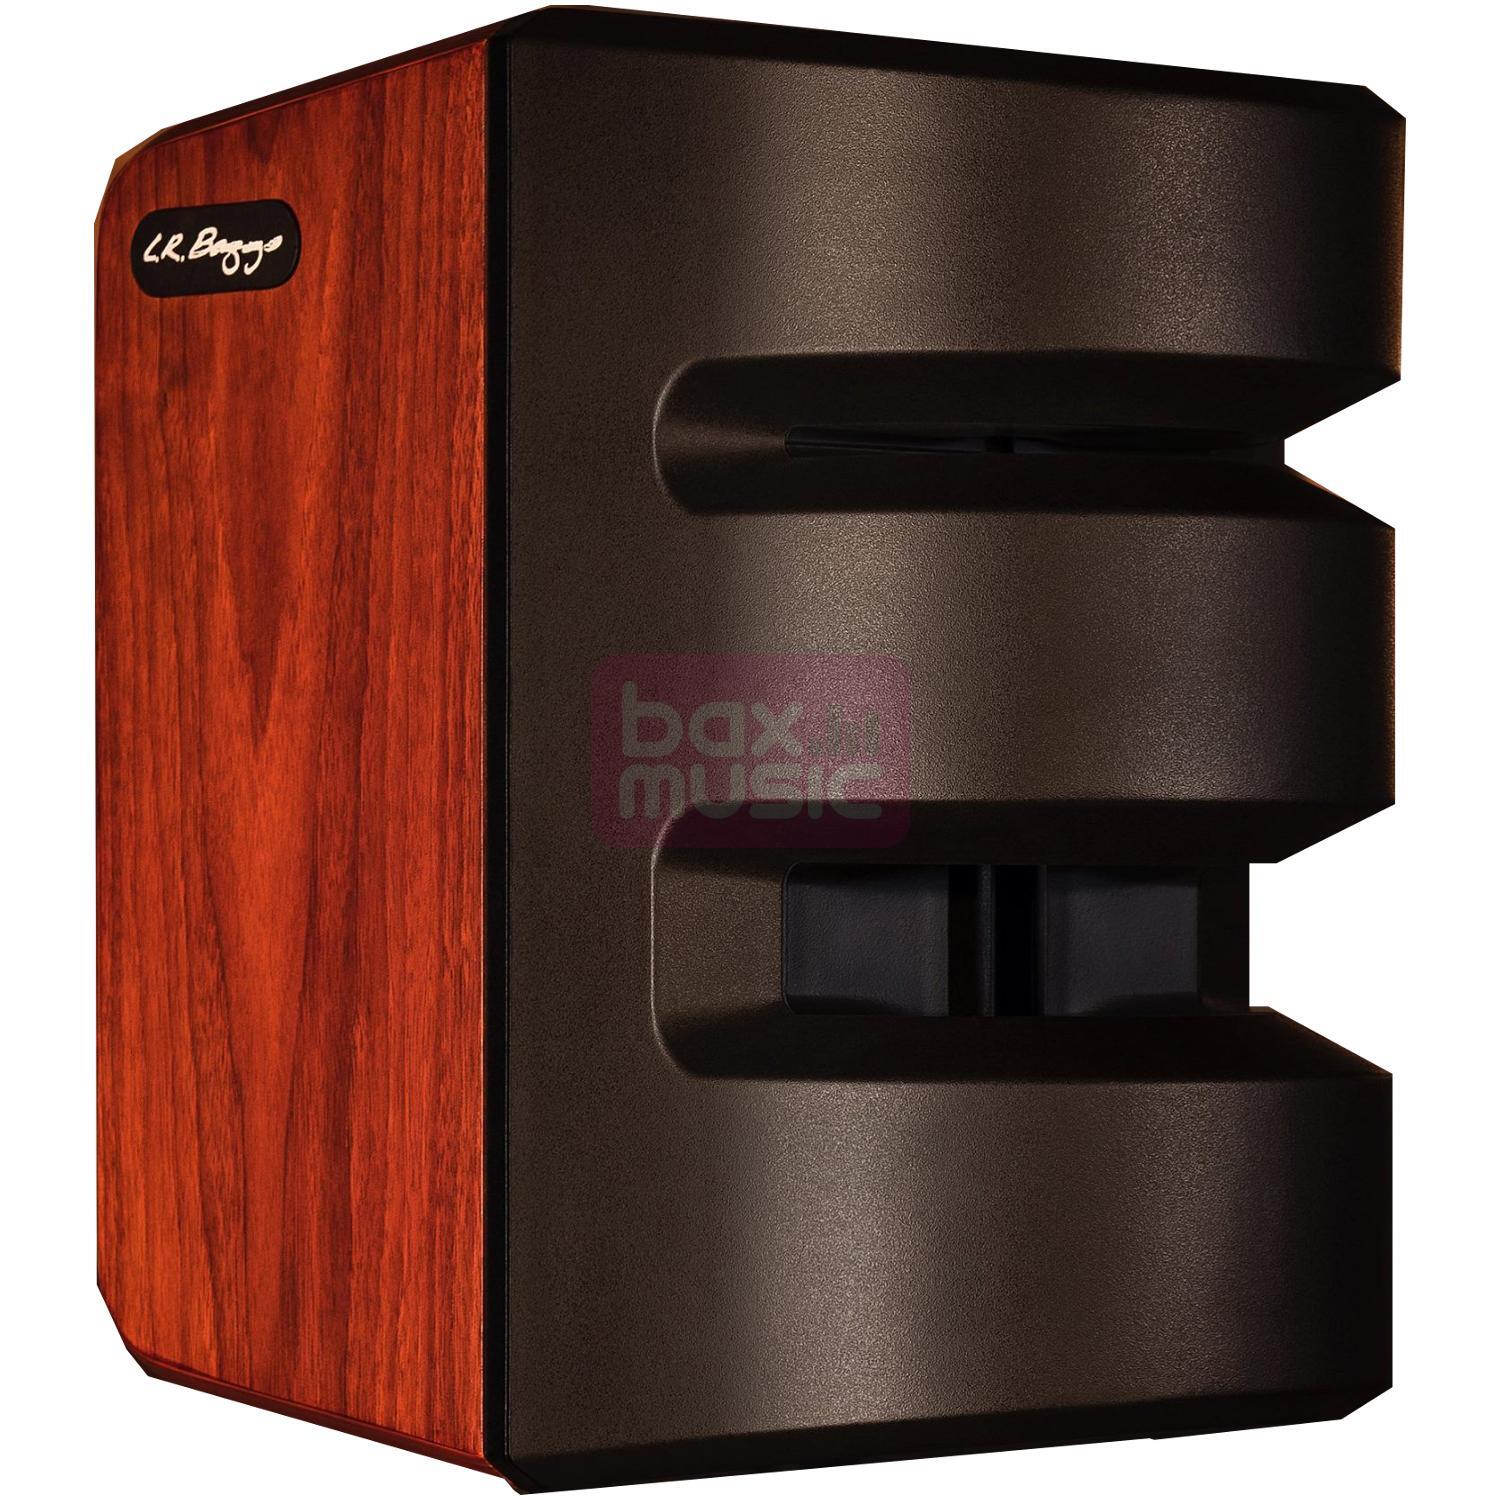 LR Baggs Synapse Personal PA System